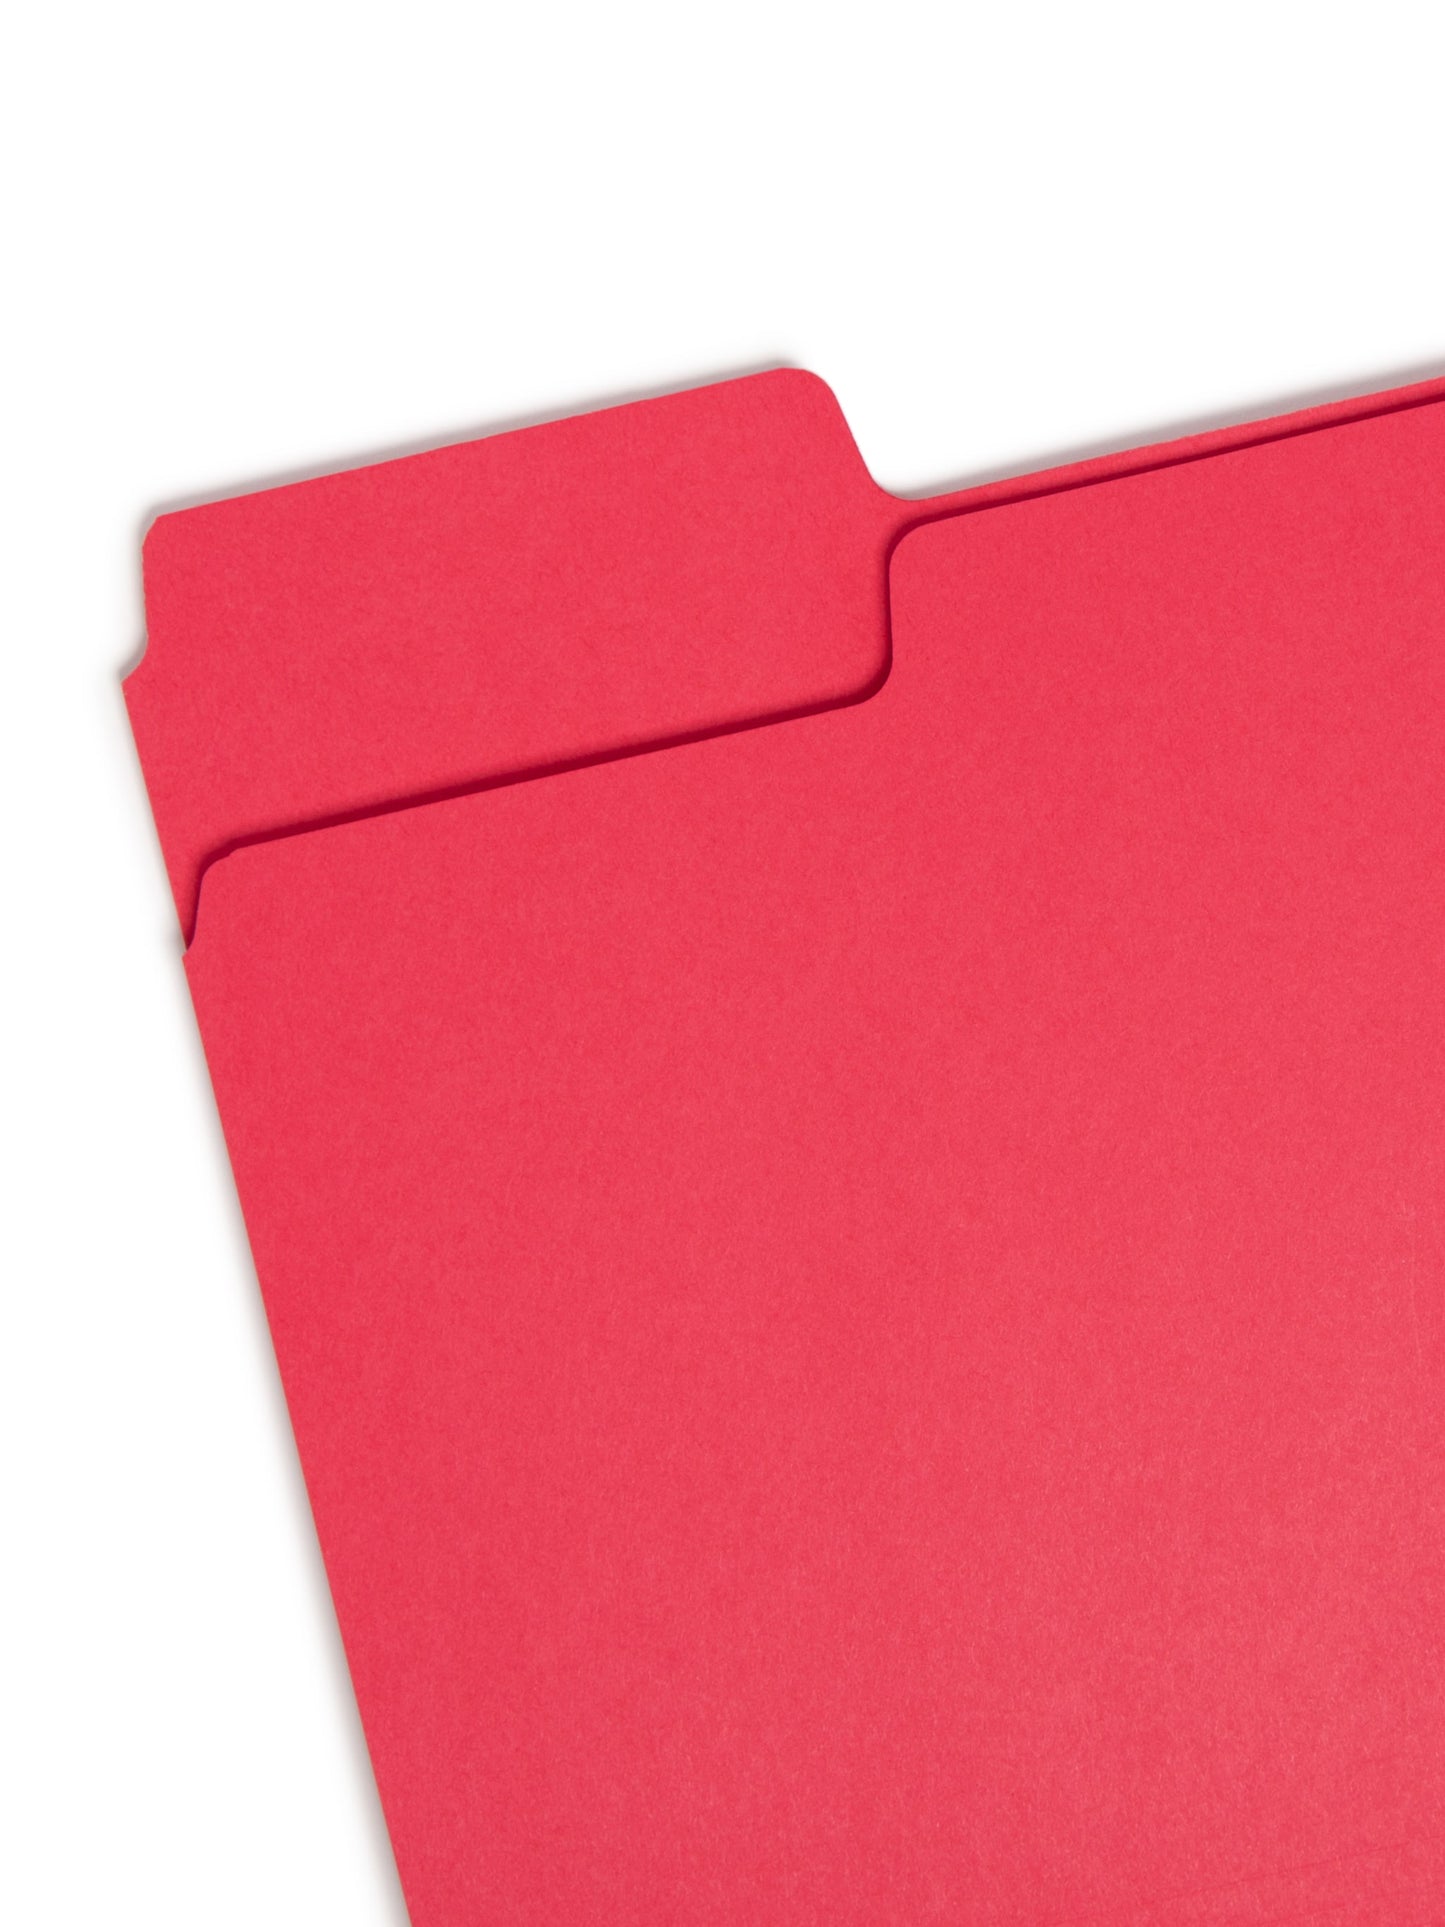 SuperTab® File Folders, 1/3-Cut Tab, Red Color, Letter Size, Set of 100, 086486119832